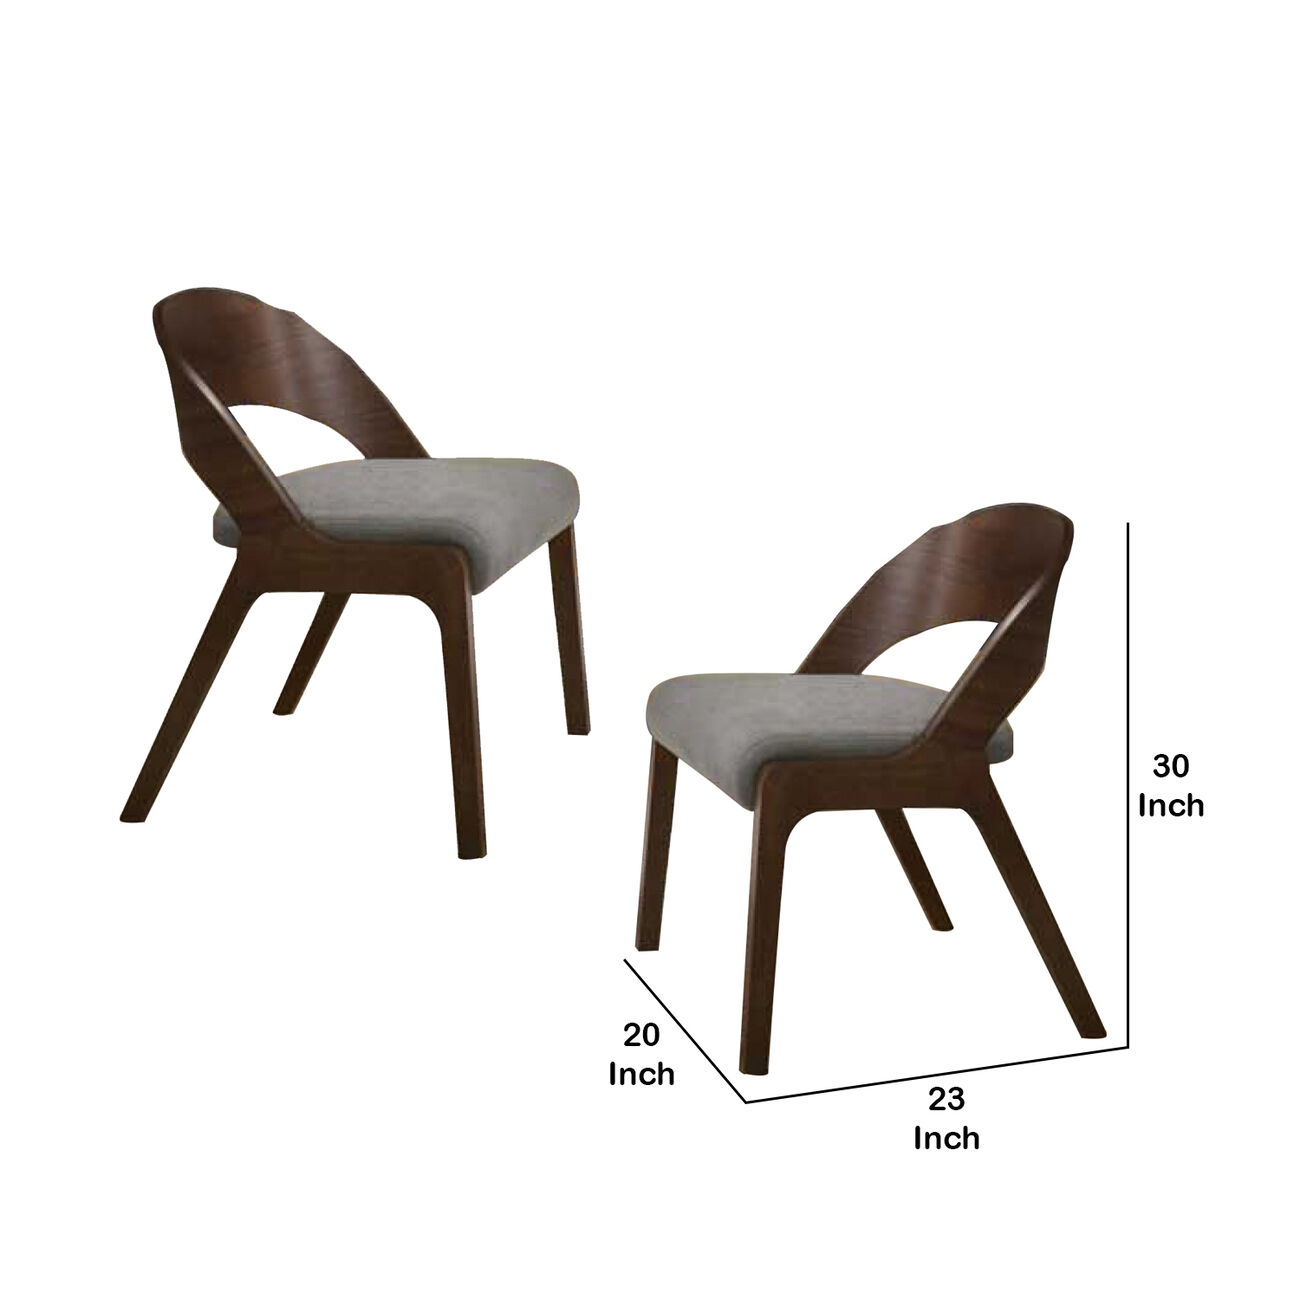 Wooden Dining Chair with Open Curved Back Design, Seat of 2, Walnut Brown